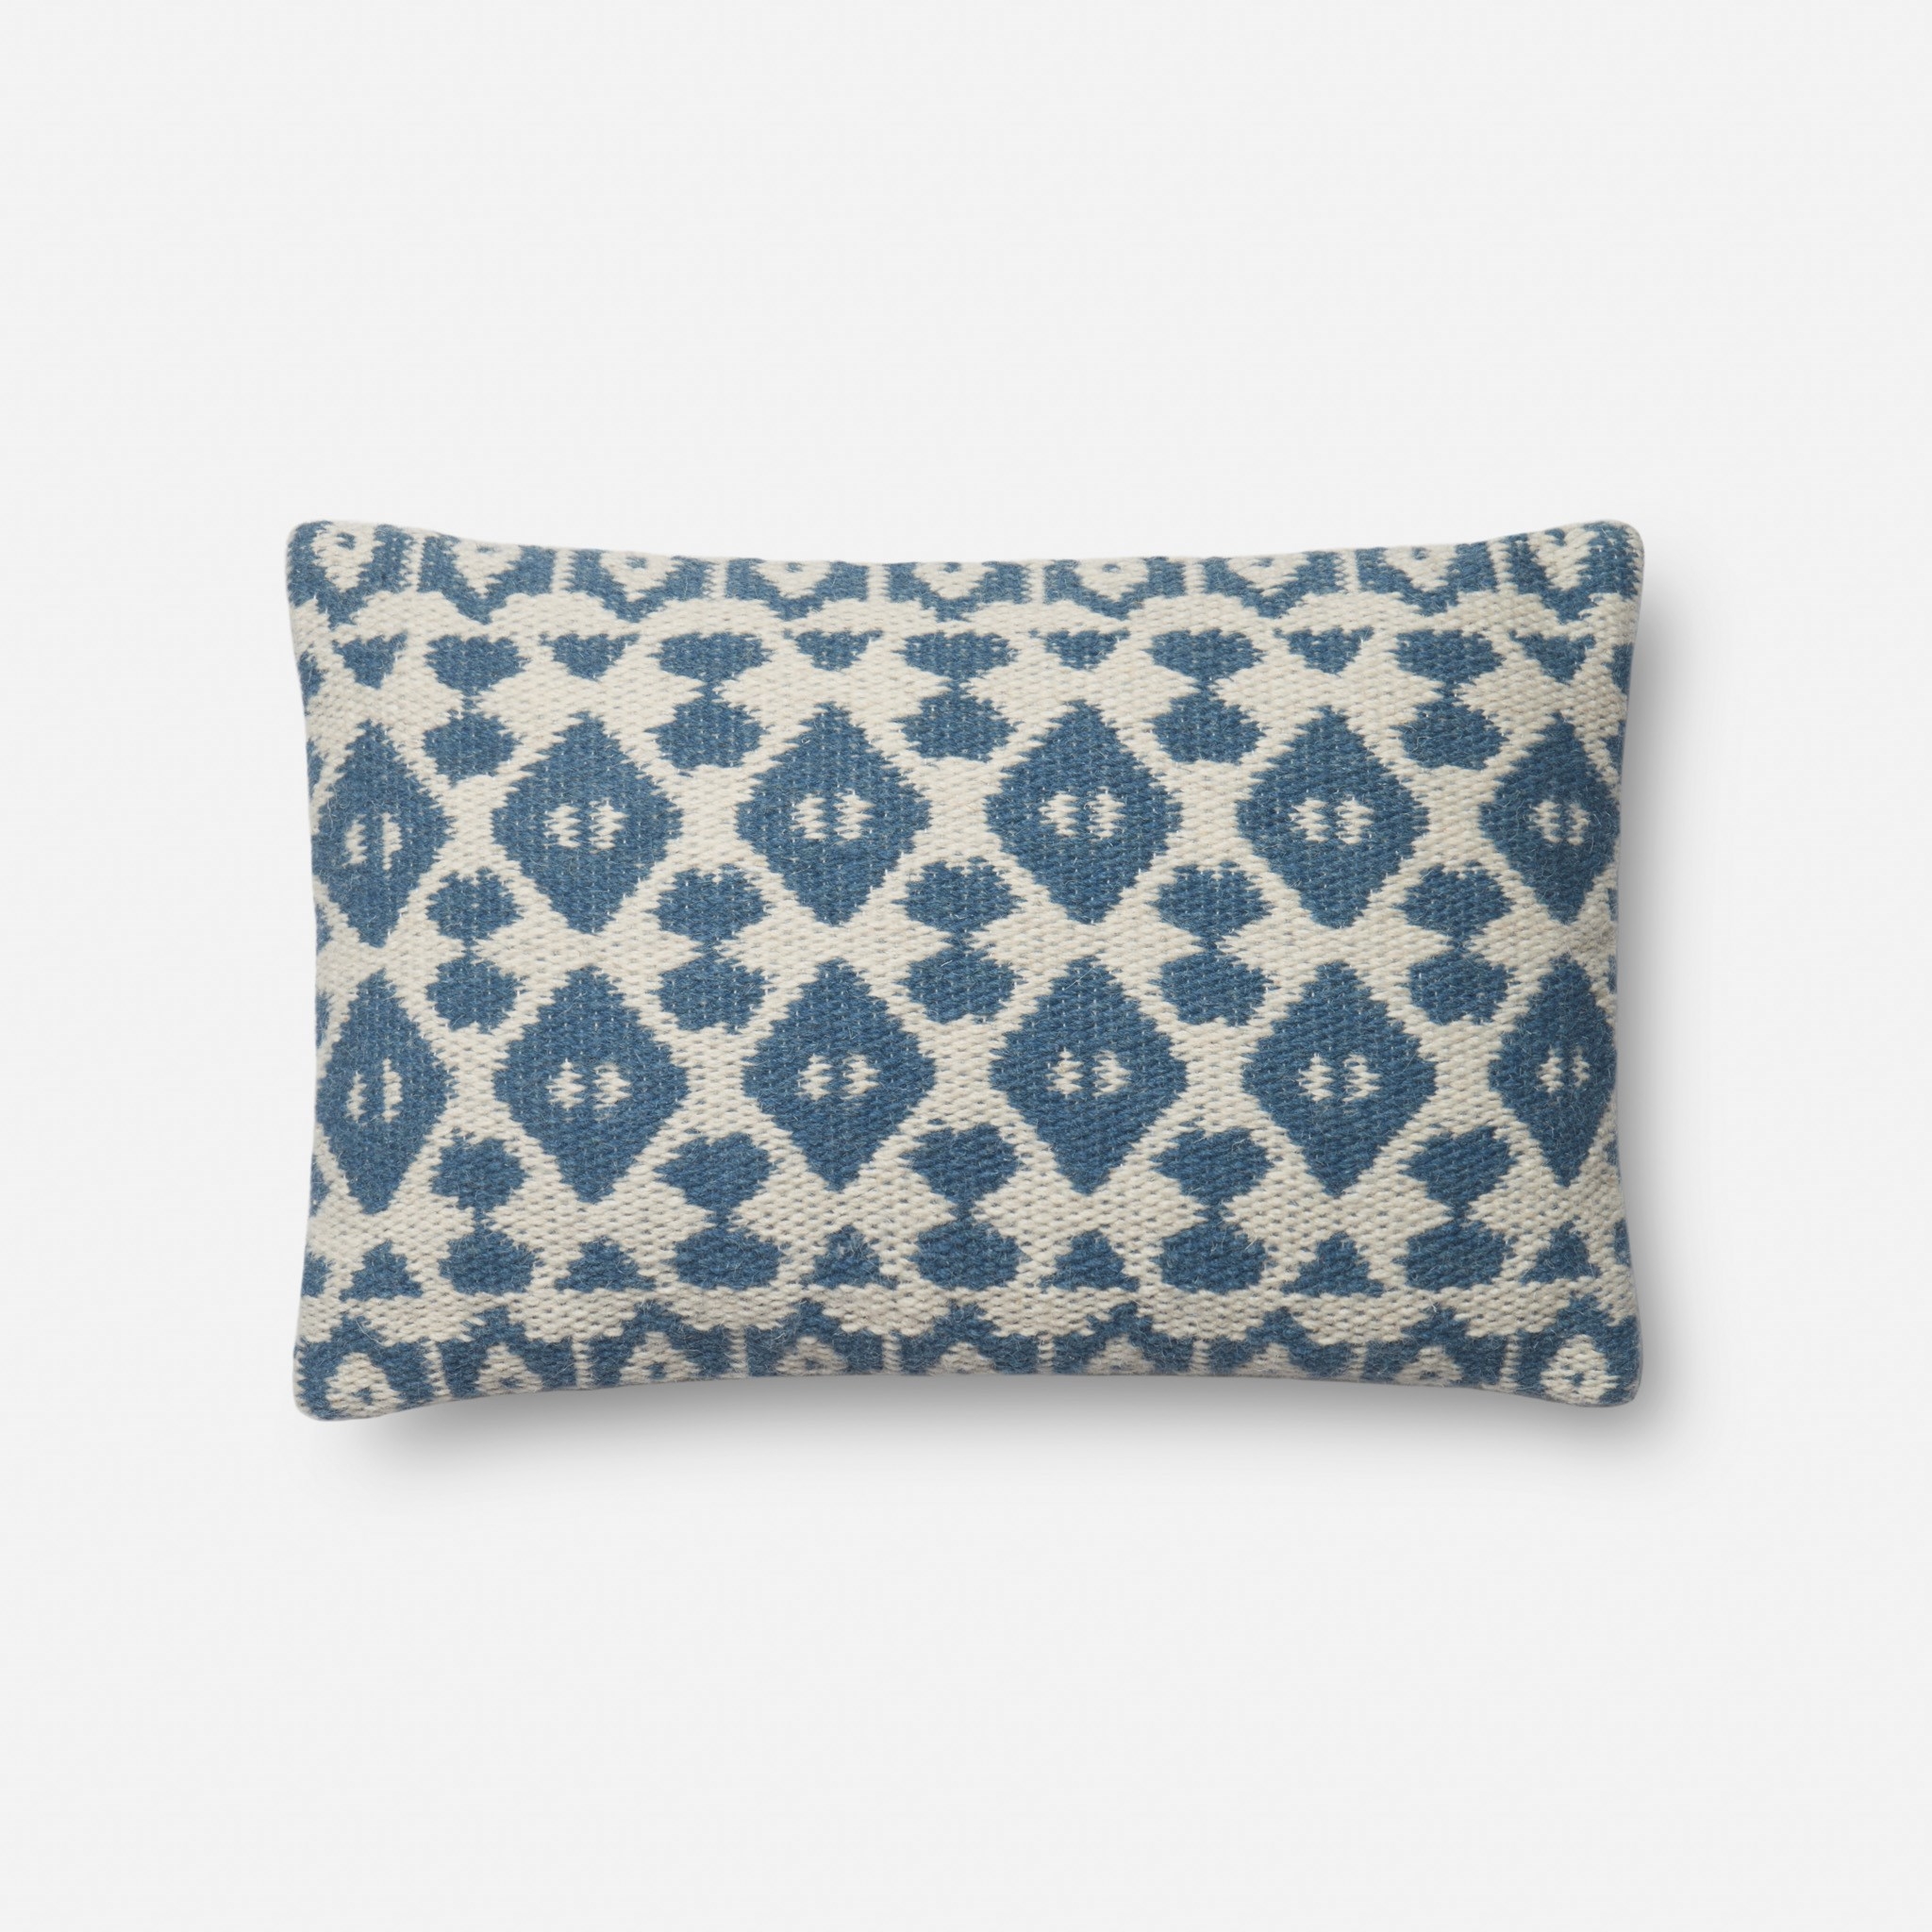 Magnolia Home by Joanna Gaines x Loloi Pillows P1064 Navy / Ivory 13" x 21" Cover Only - Image 0